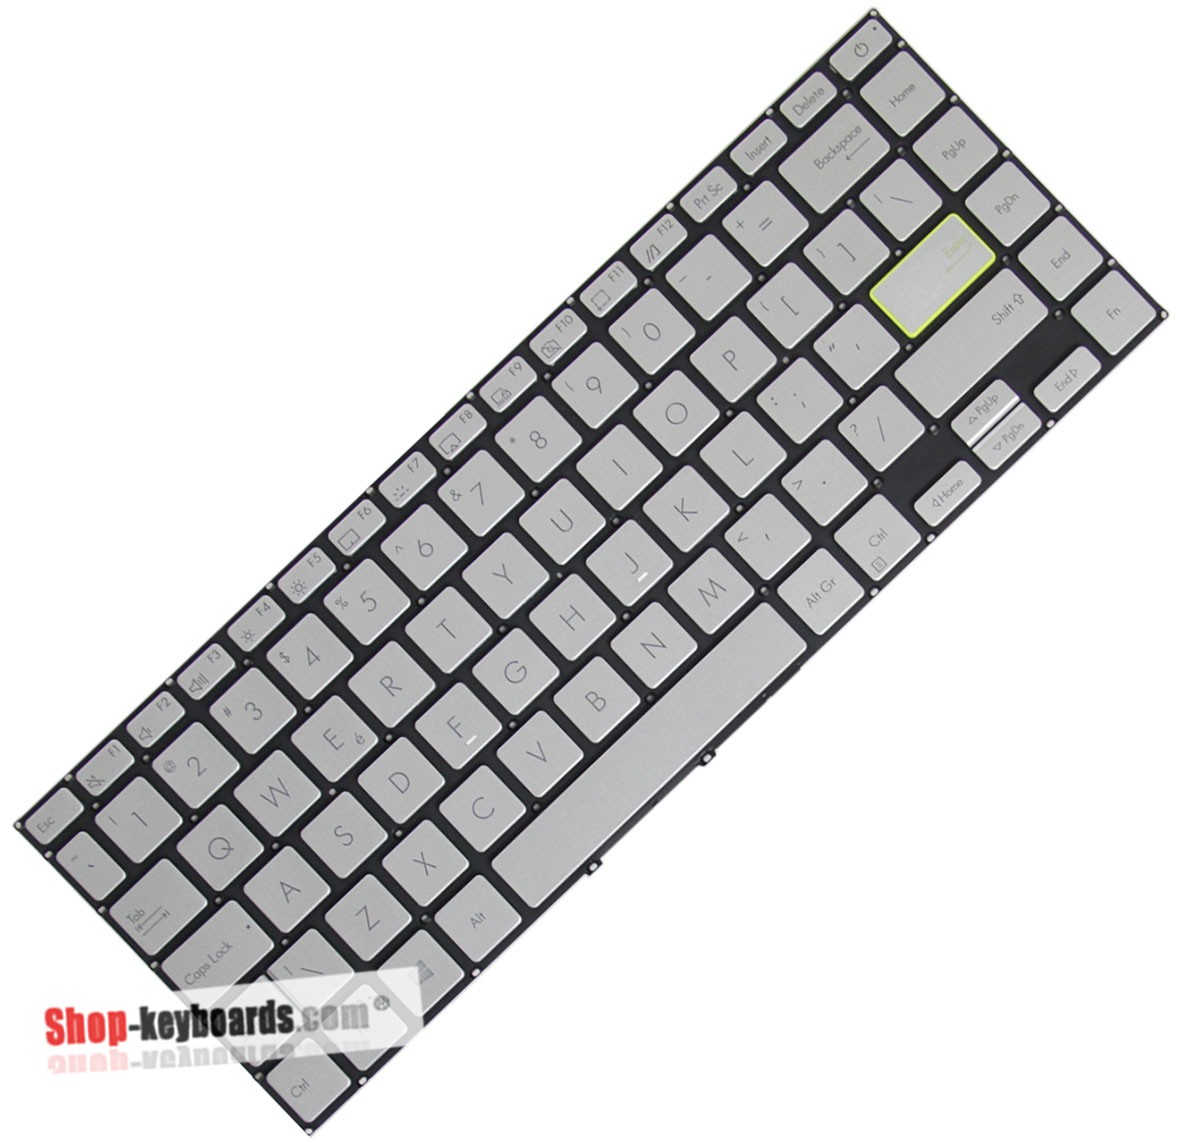 Asus 0KNB0-260NUI00  Keyboard replacement